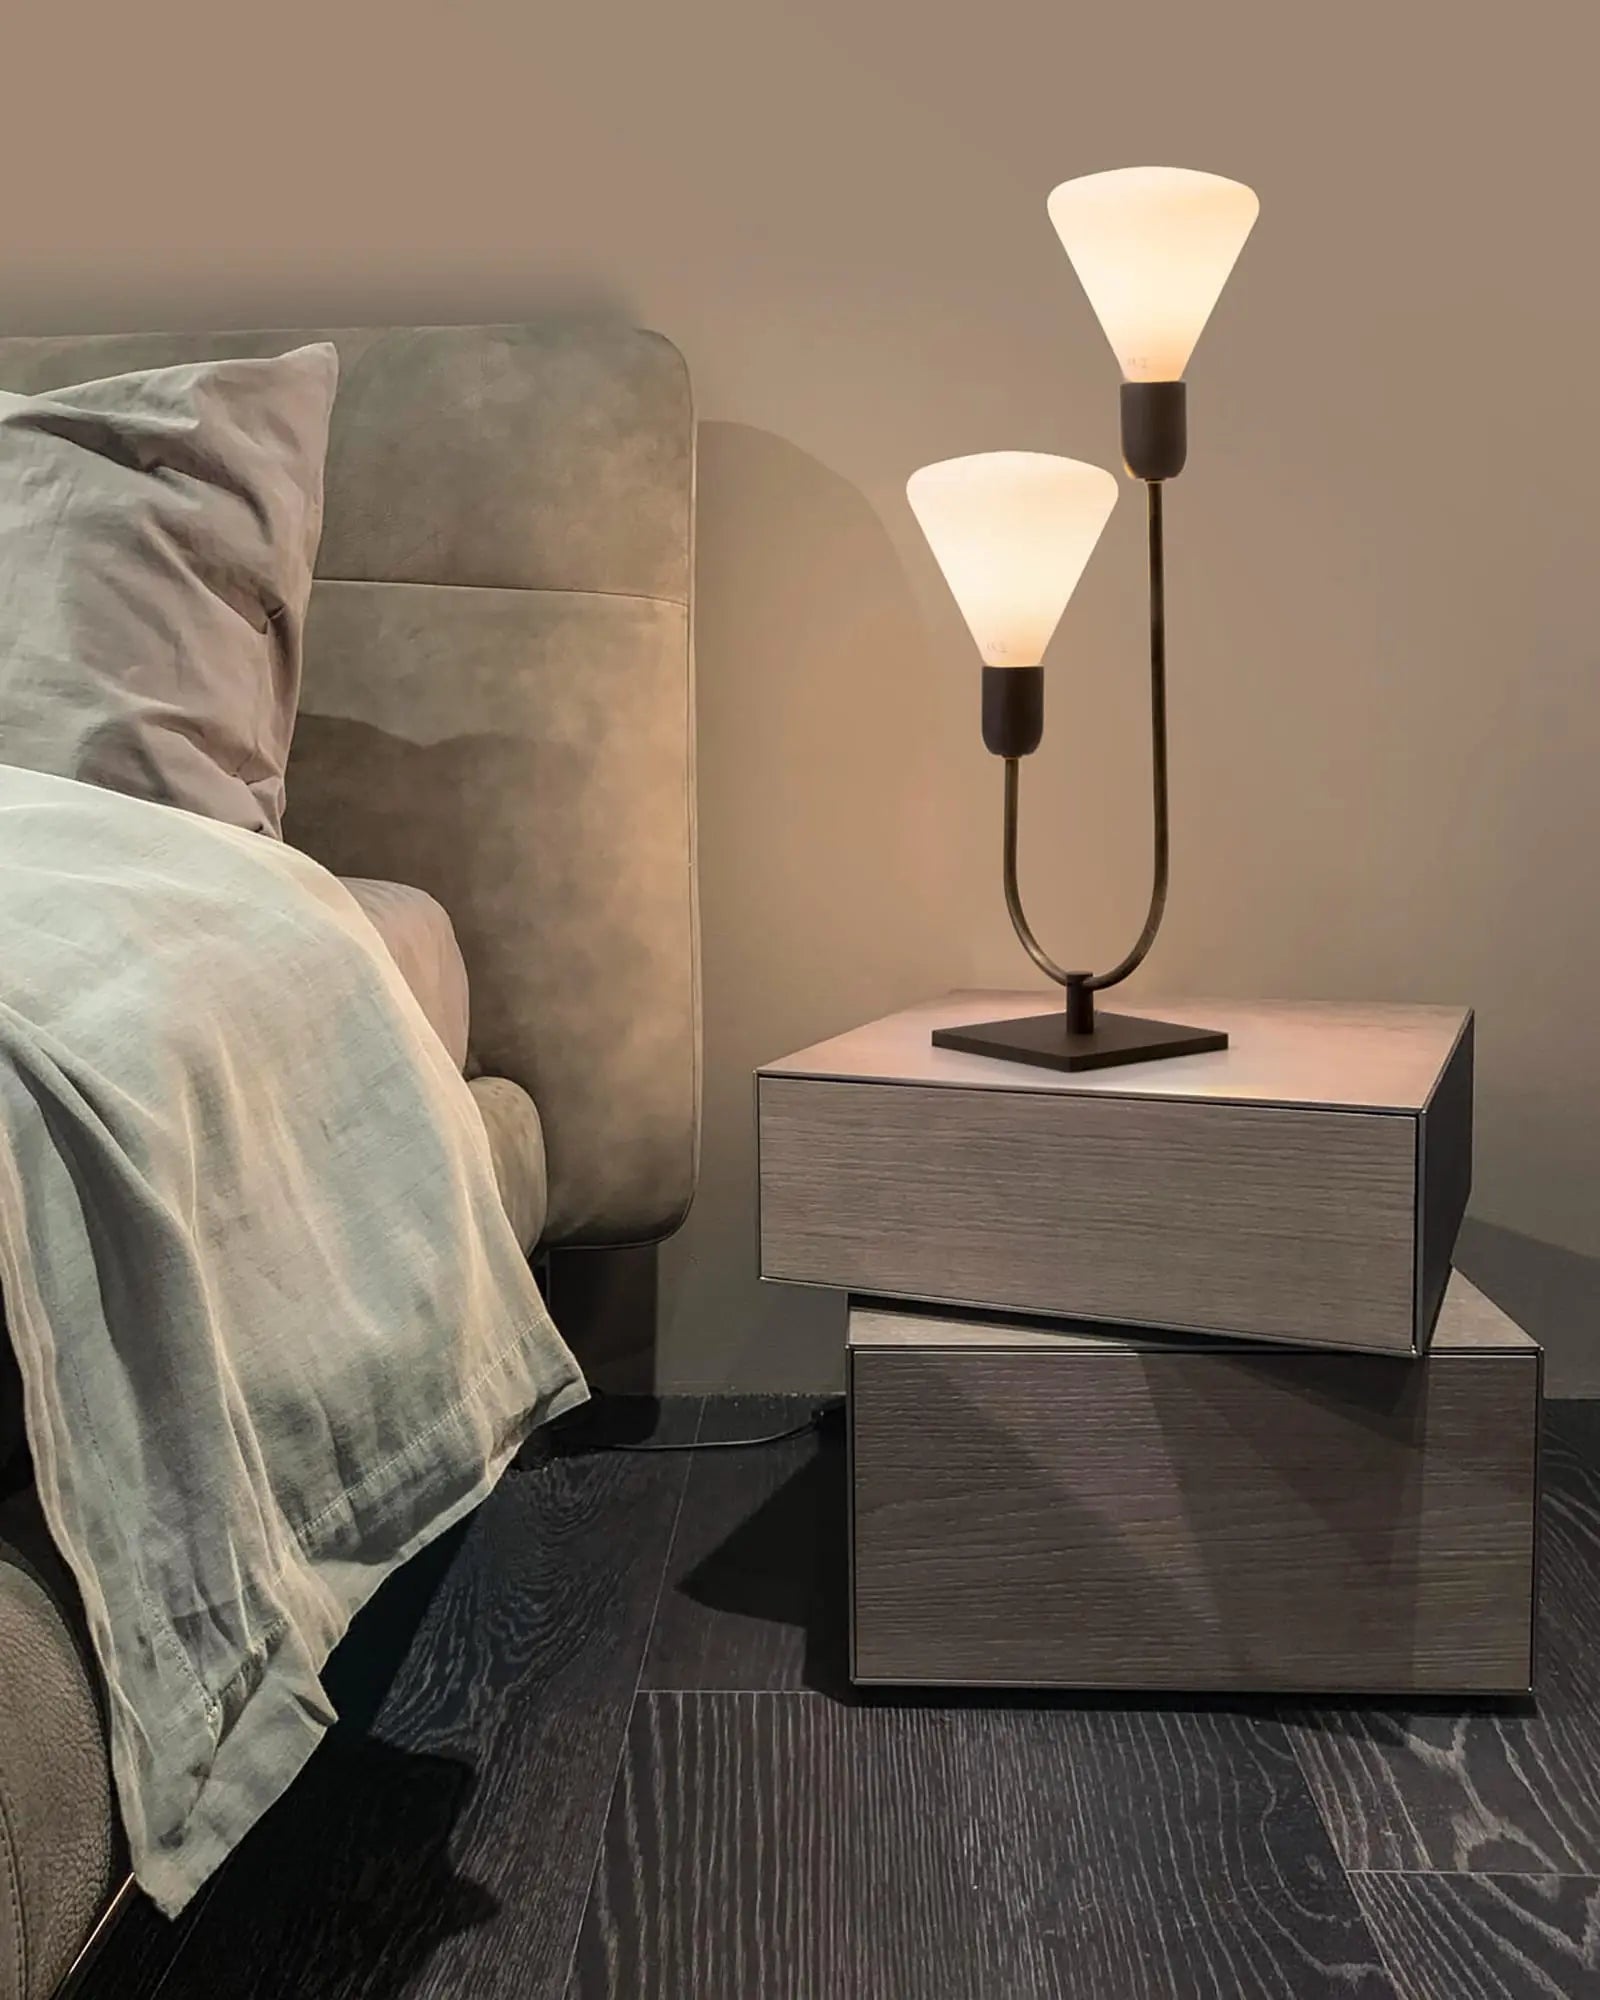 Smith 2 table lamp bed side